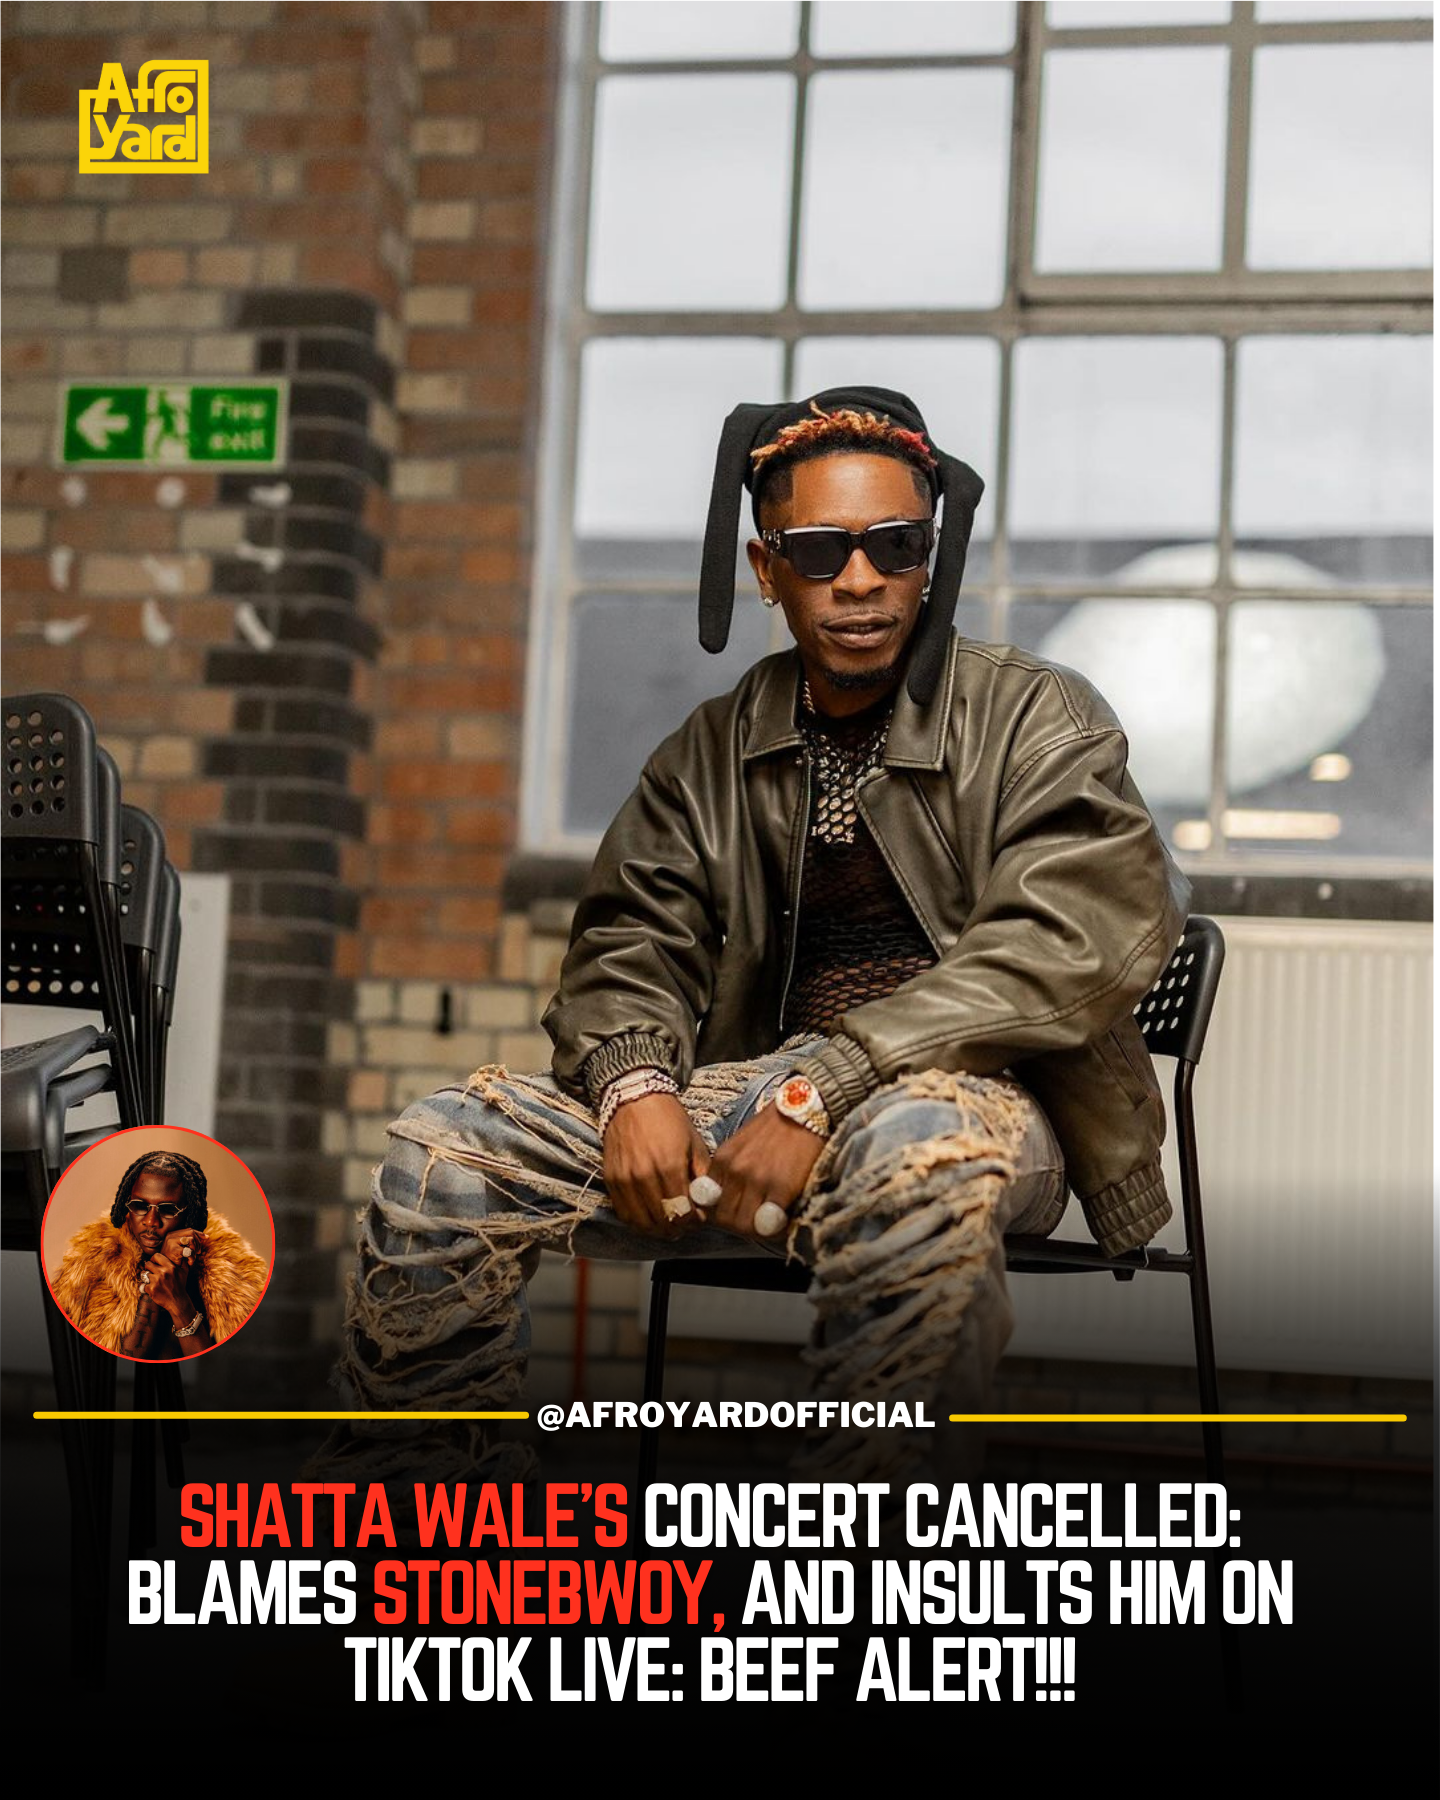 Shatta Wale Goes Wild on Stonebwoy With Insults Amidst Cancelled Show at University Of Ghana